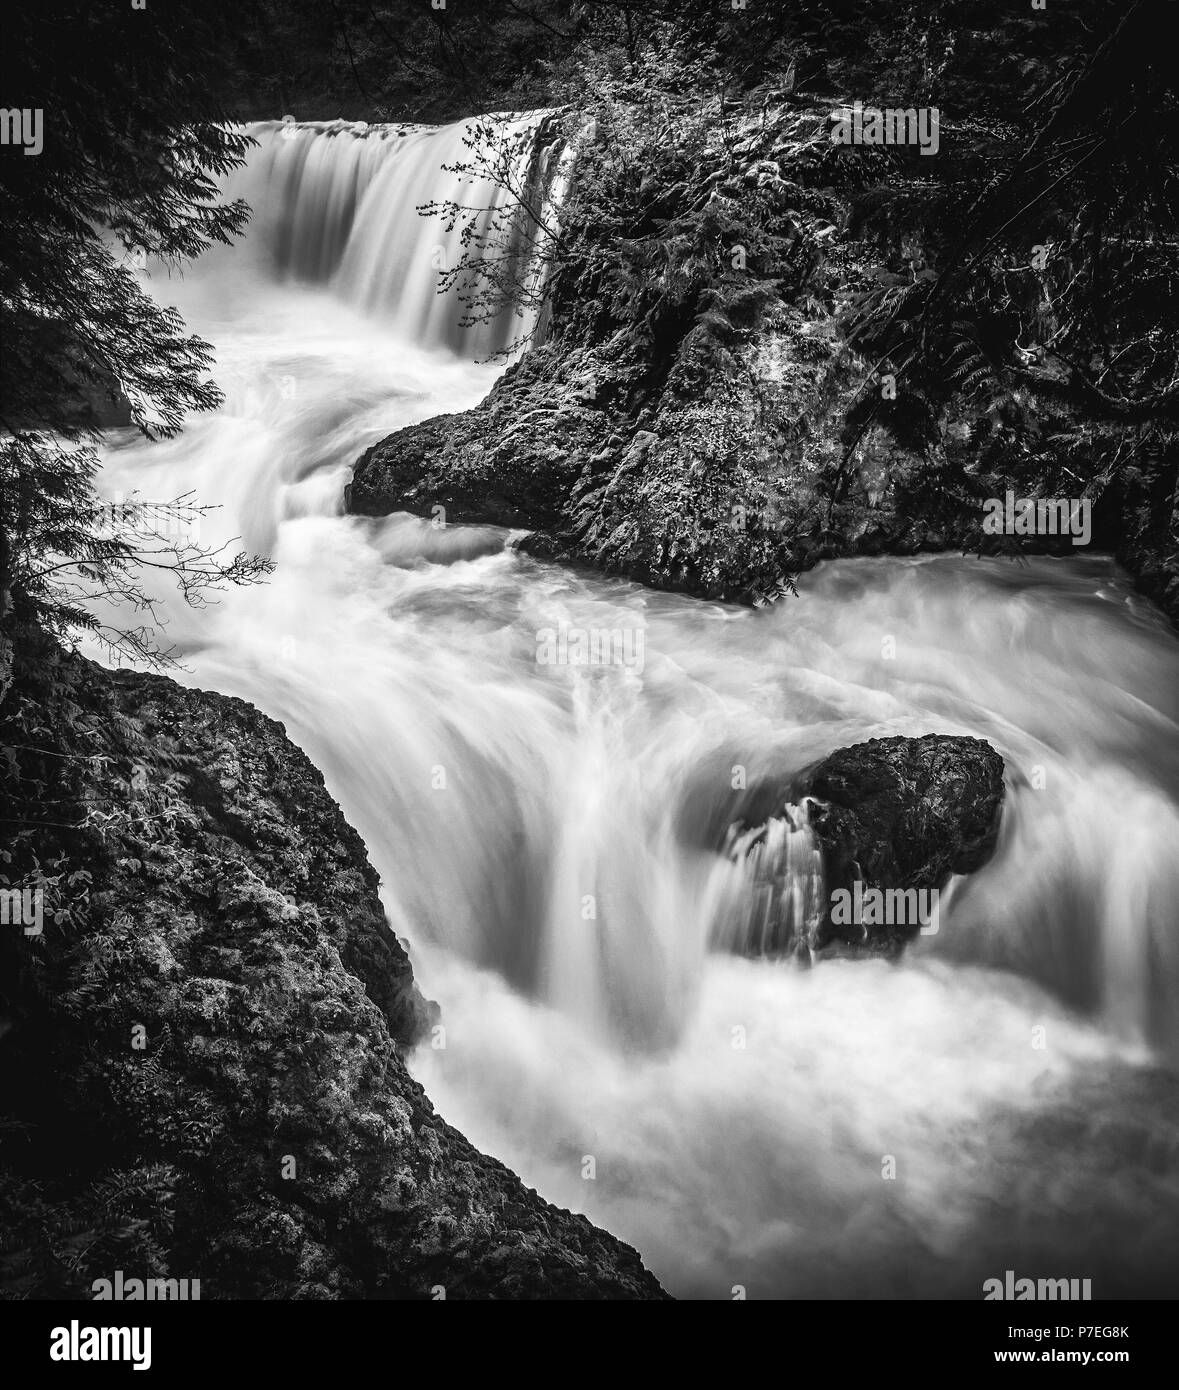 Black and white, high contrast, flowing Spirit Falls waterfall on the Washington side of the Columbia River Gorge, near Portland Oregon. Stock Photo